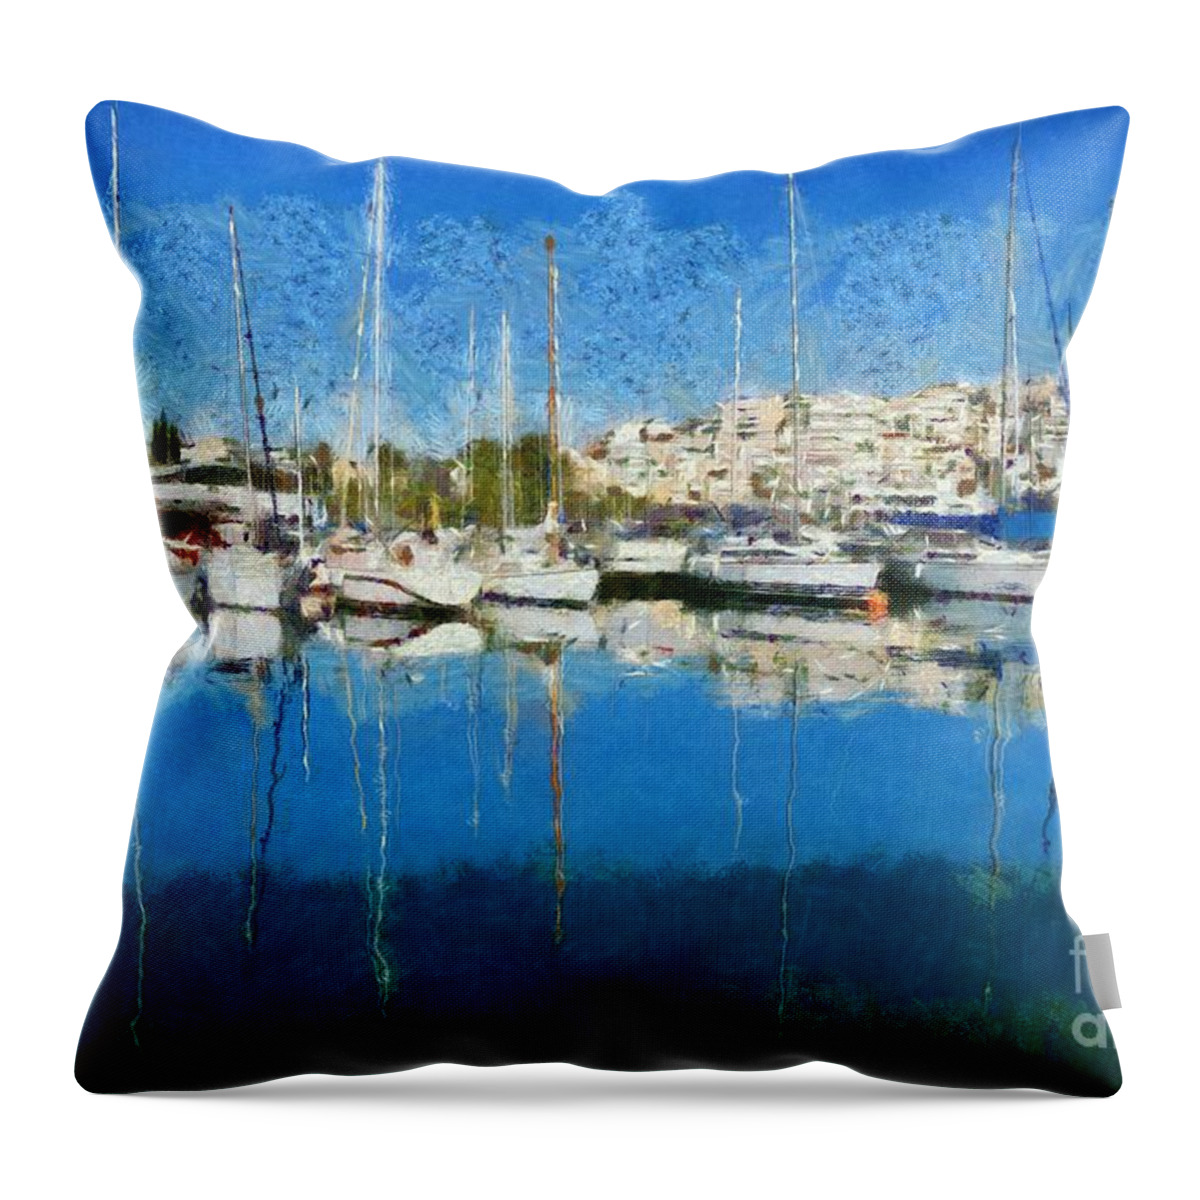 Mikrolimano Throw Pillow featuring the painting Reflections in Mikrolimano port #24 by George Atsametakis